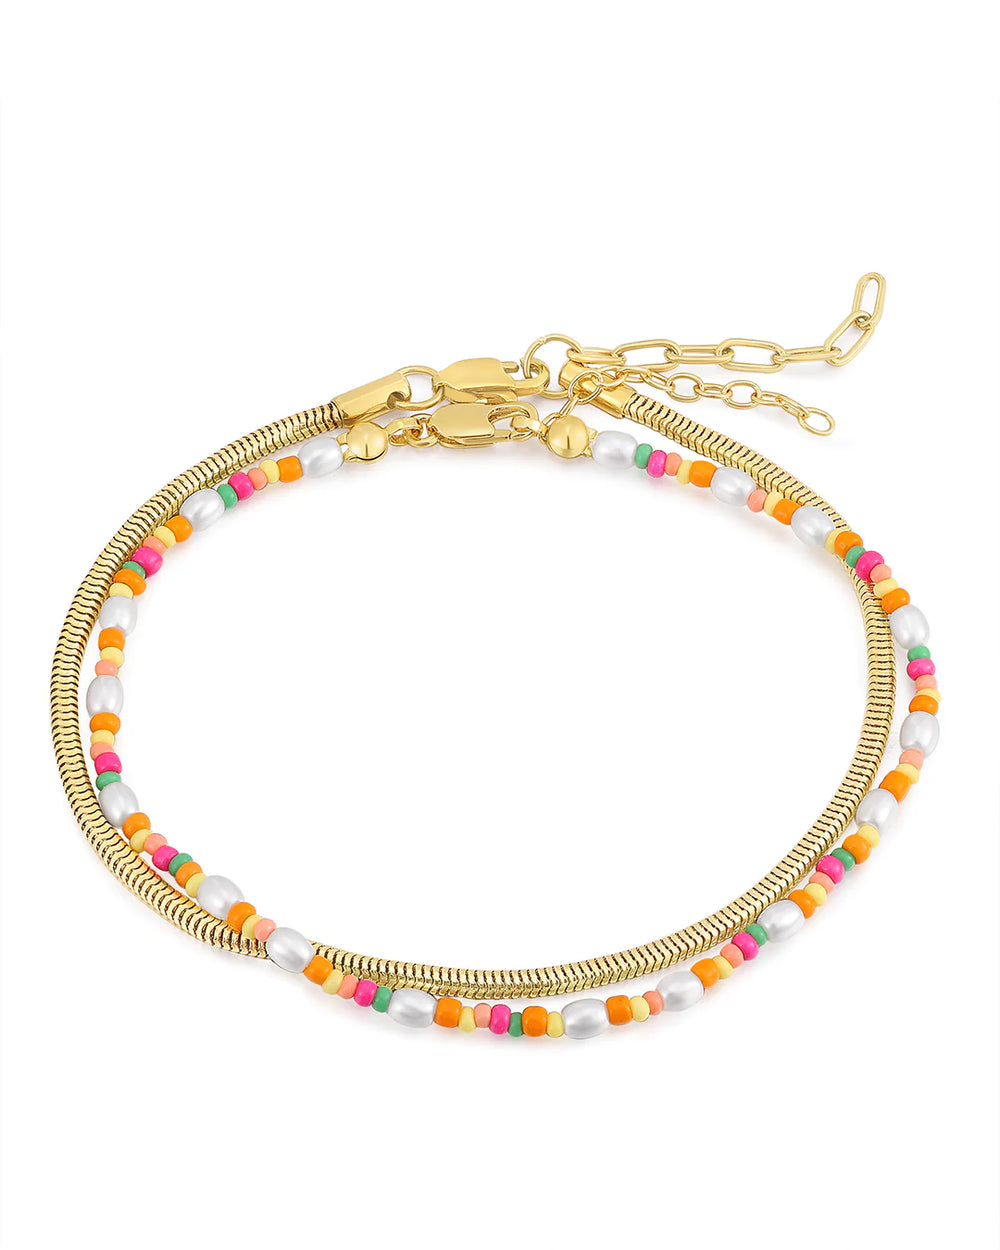 Lahaina Pearl Anklet Set in Gold - Madison&